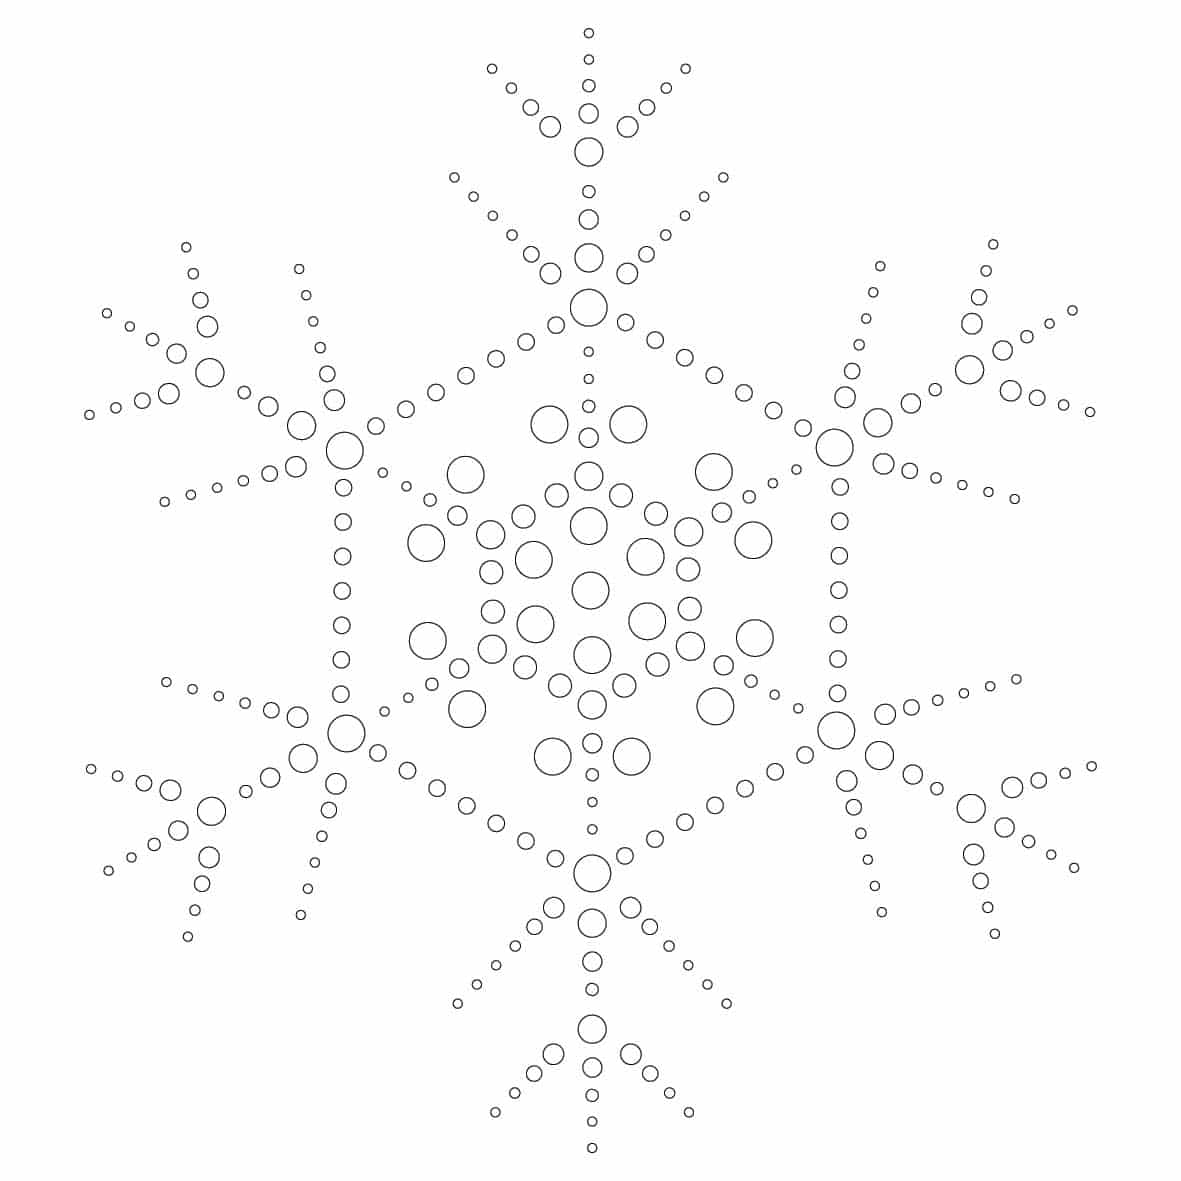 Dotpainting Canvas "Snowflake"